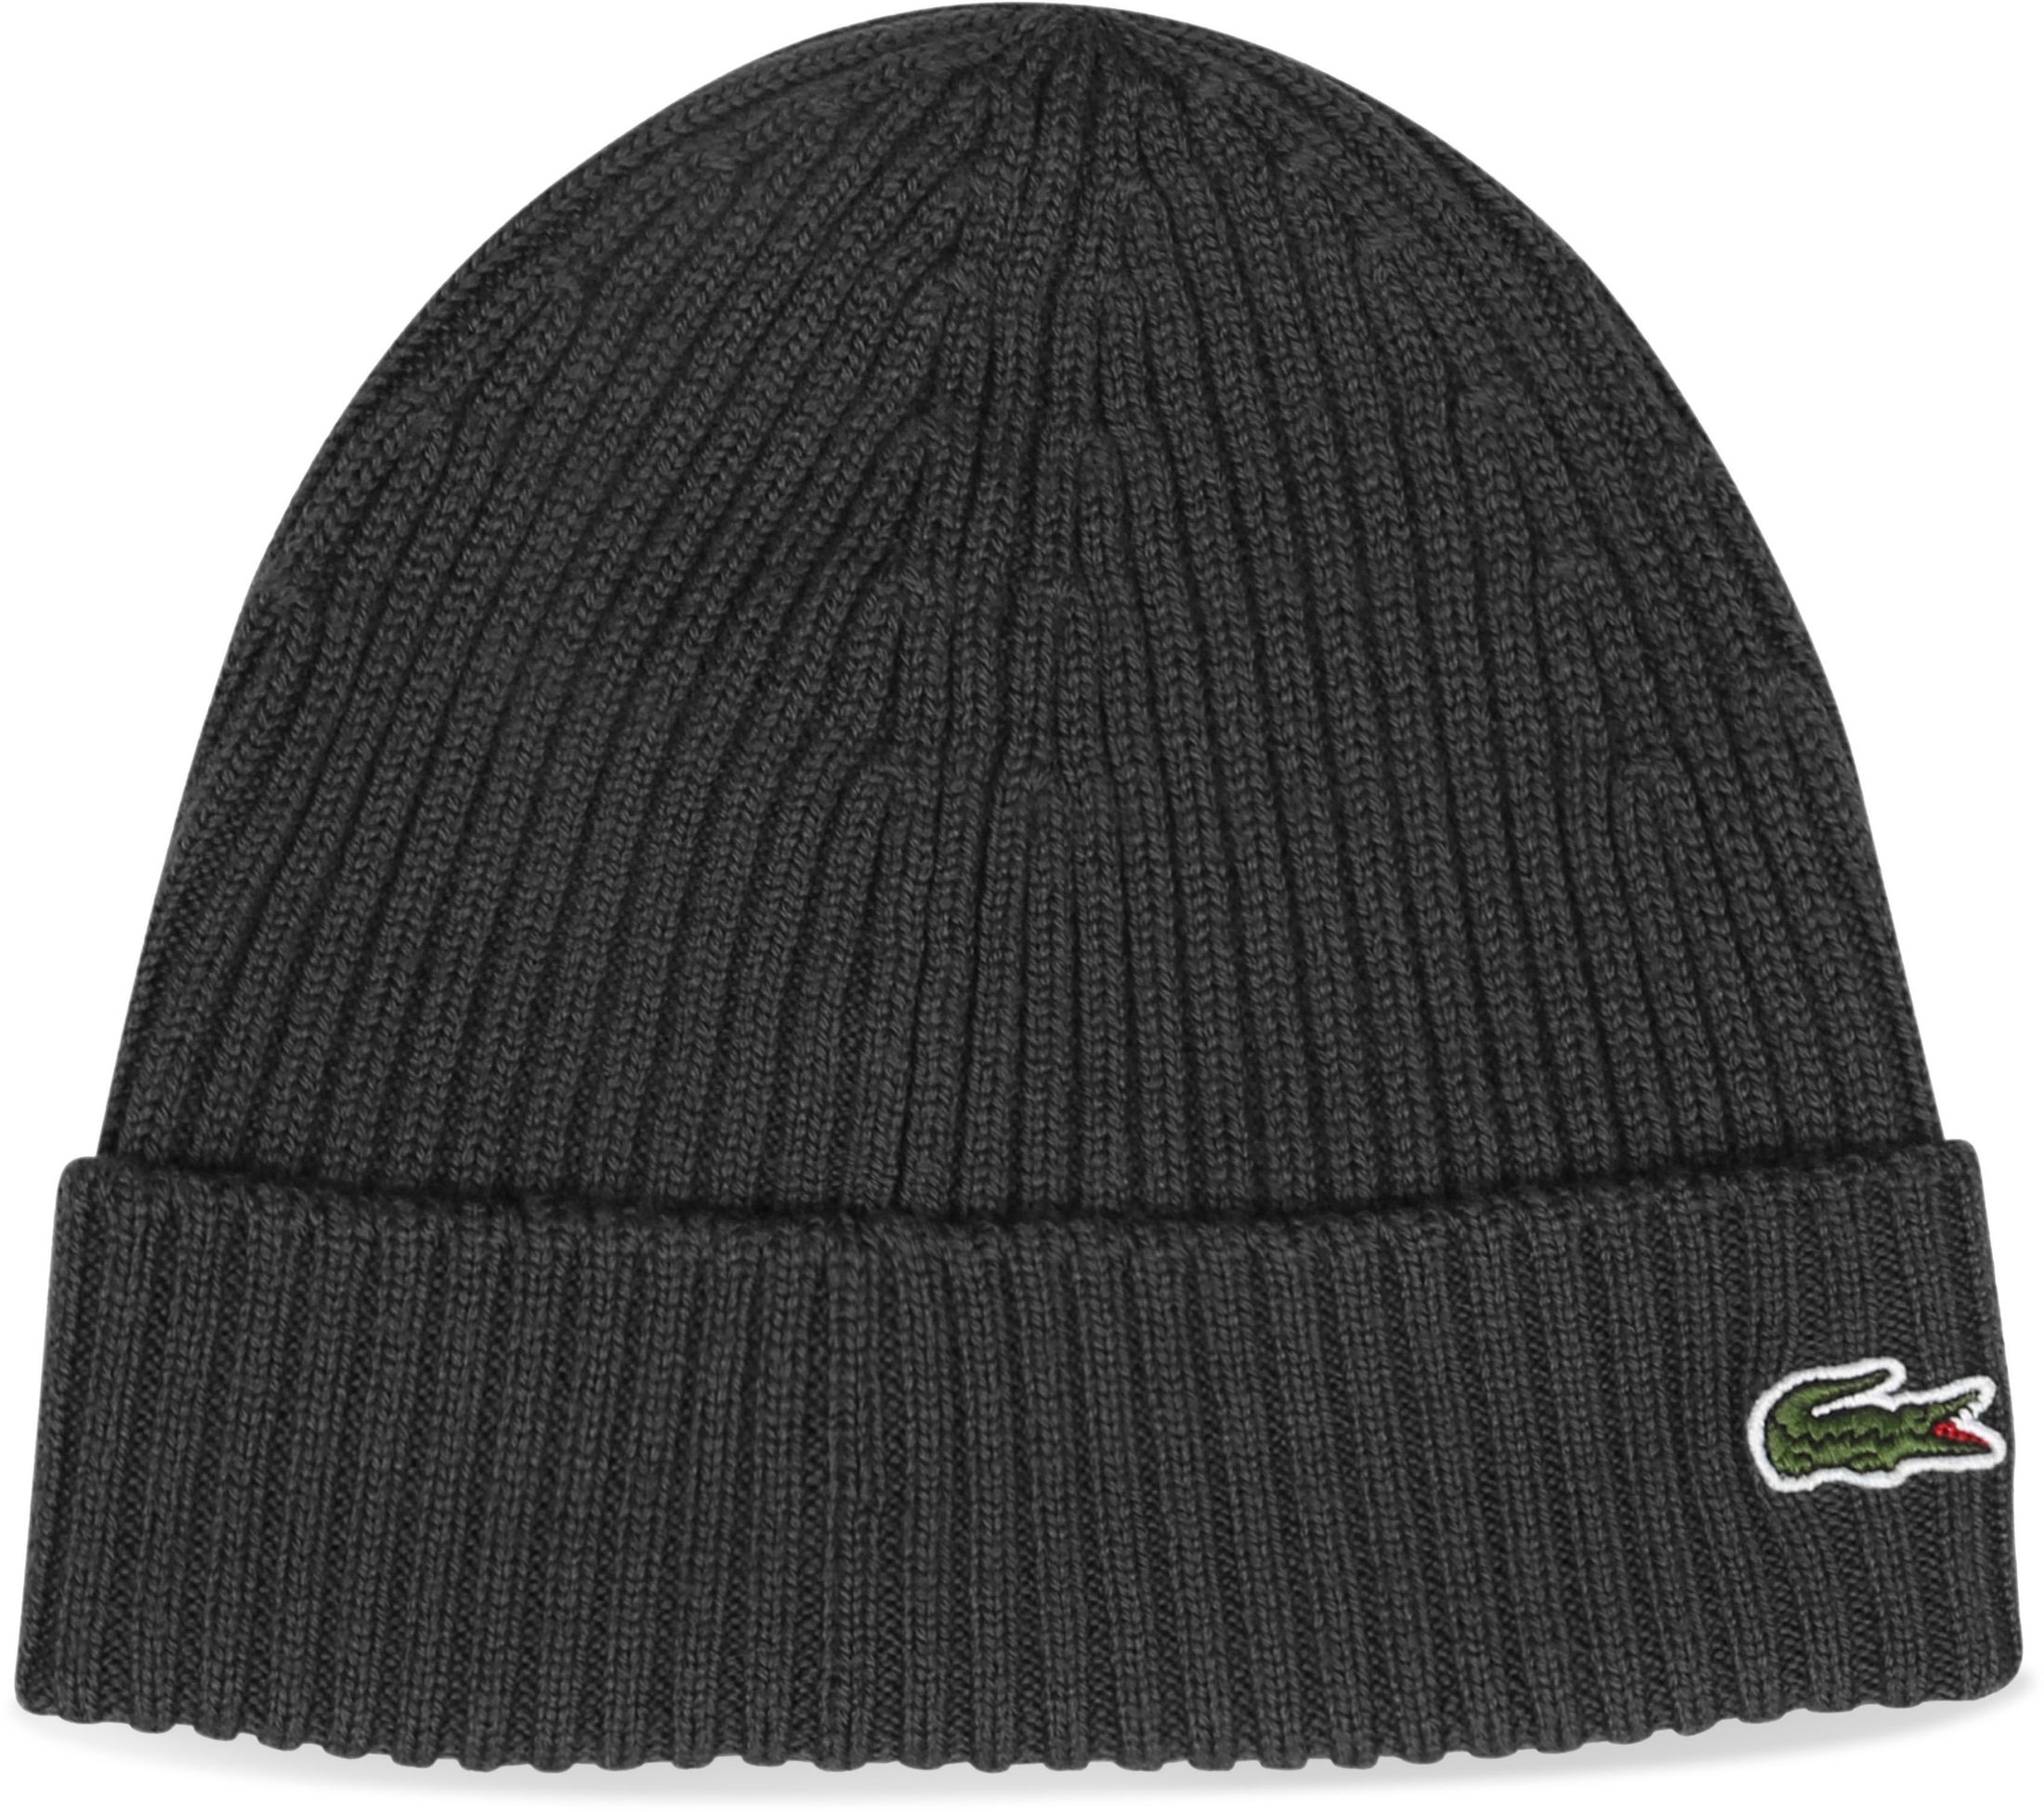 Lacoste Knitted Beanie Black